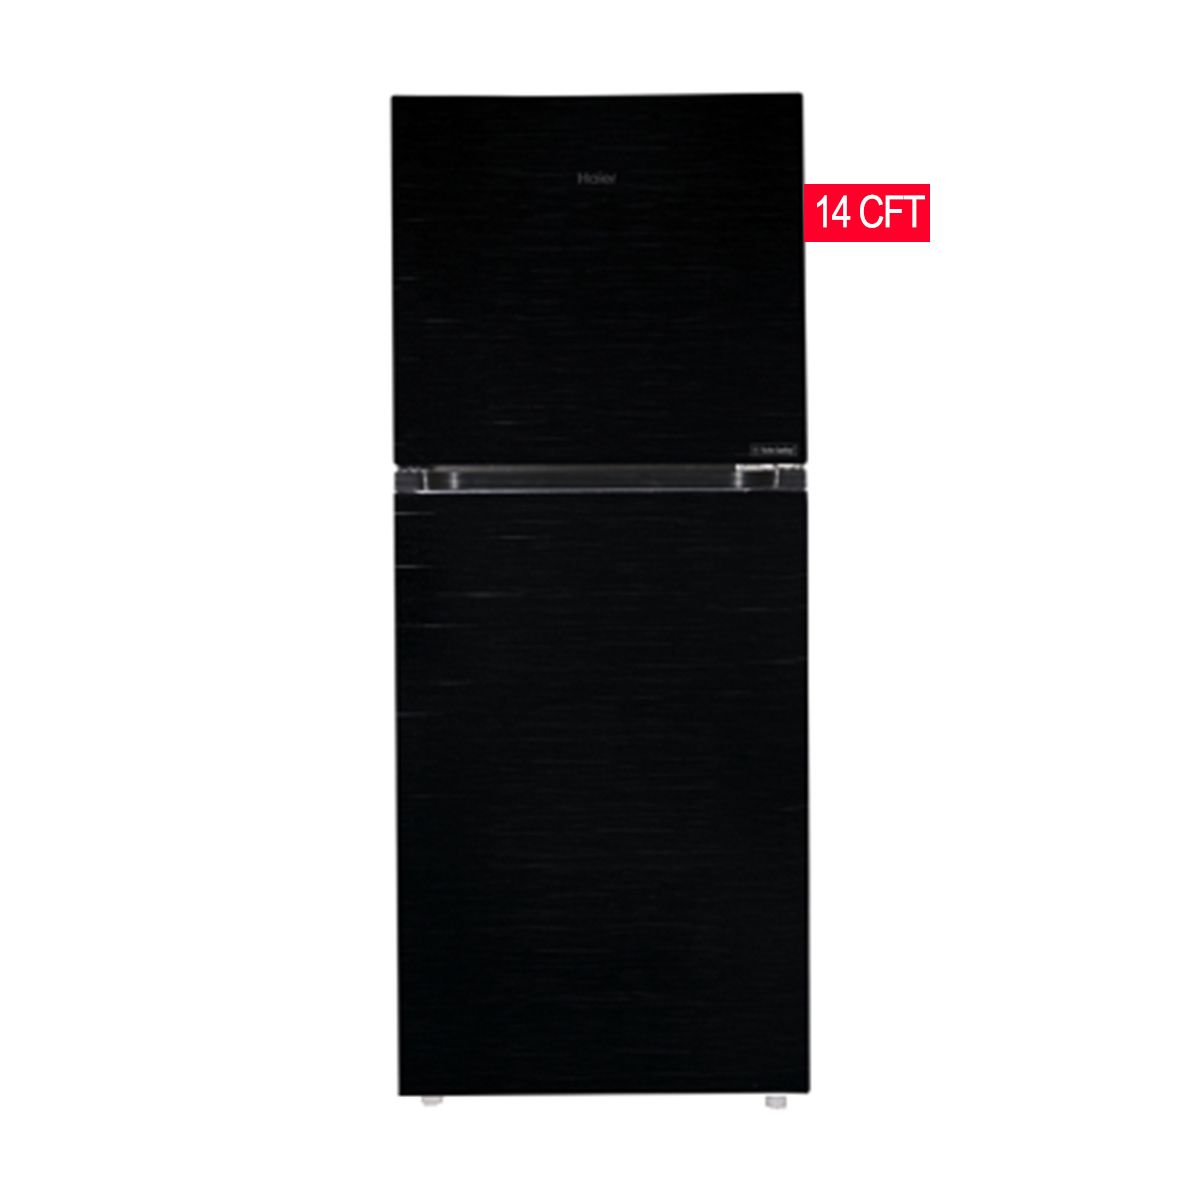 haier-hfr-398-tpb-tpr-14-cft-turbo-cooling-refrigerator